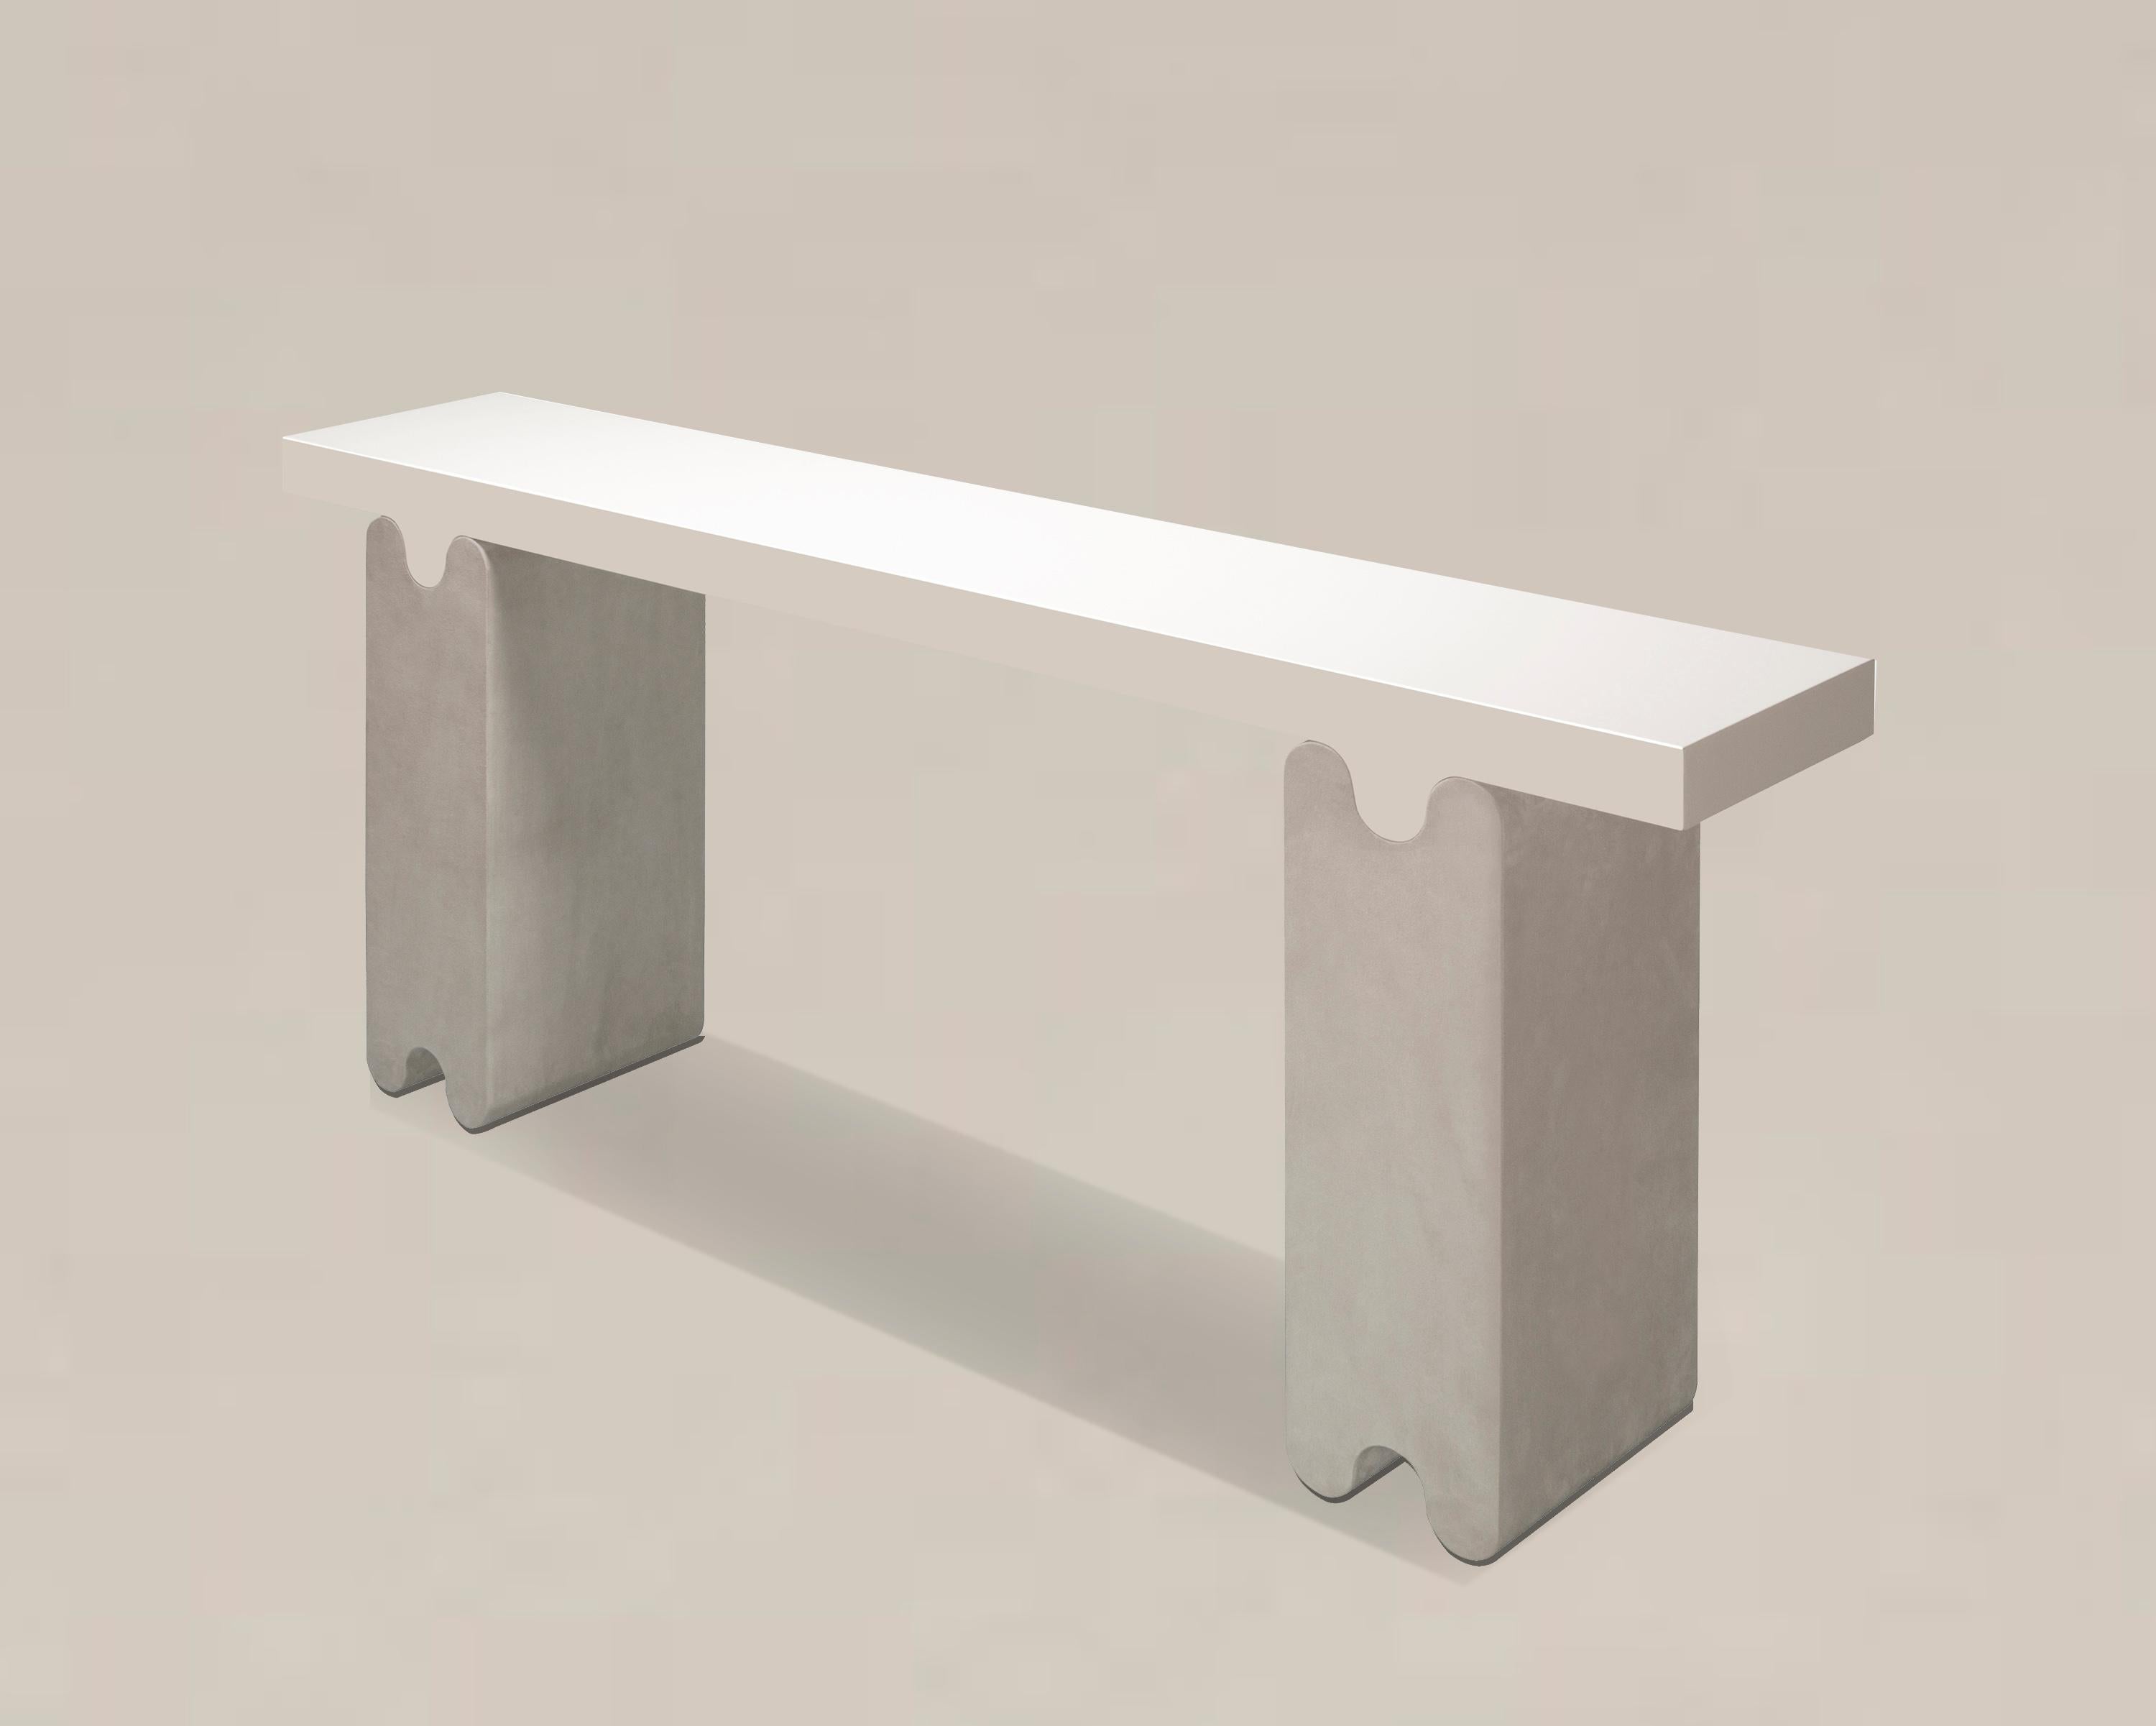 Contemporary leather console - Ossicle by Francesco Balzano for Giobagnara.
The object presented in the image has following finish: F95 Off White Nappa Leather (top) and A37 Light Grey Suede Leather (legs).

Part of an exquisite series of benches,